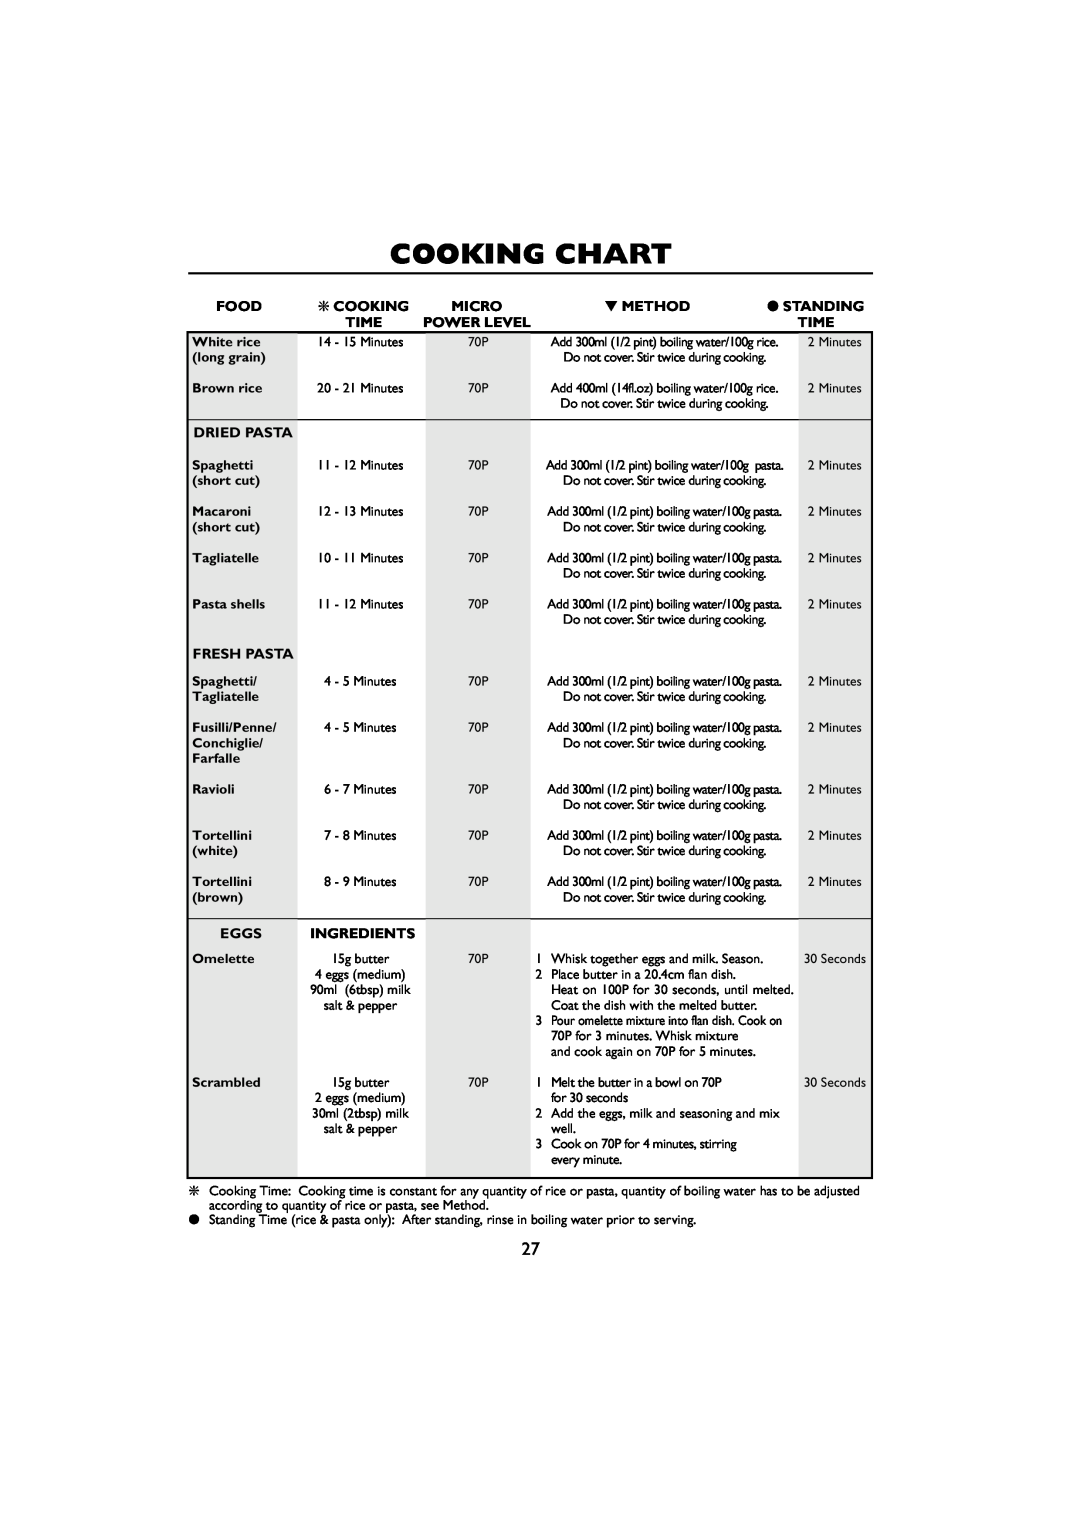 Sharp R-259 Cooking Chart, Food, Micro, Method, Standing, Time, Power Level, Dried Pasta, Fresh Pasta, Eggs, Ingredients 